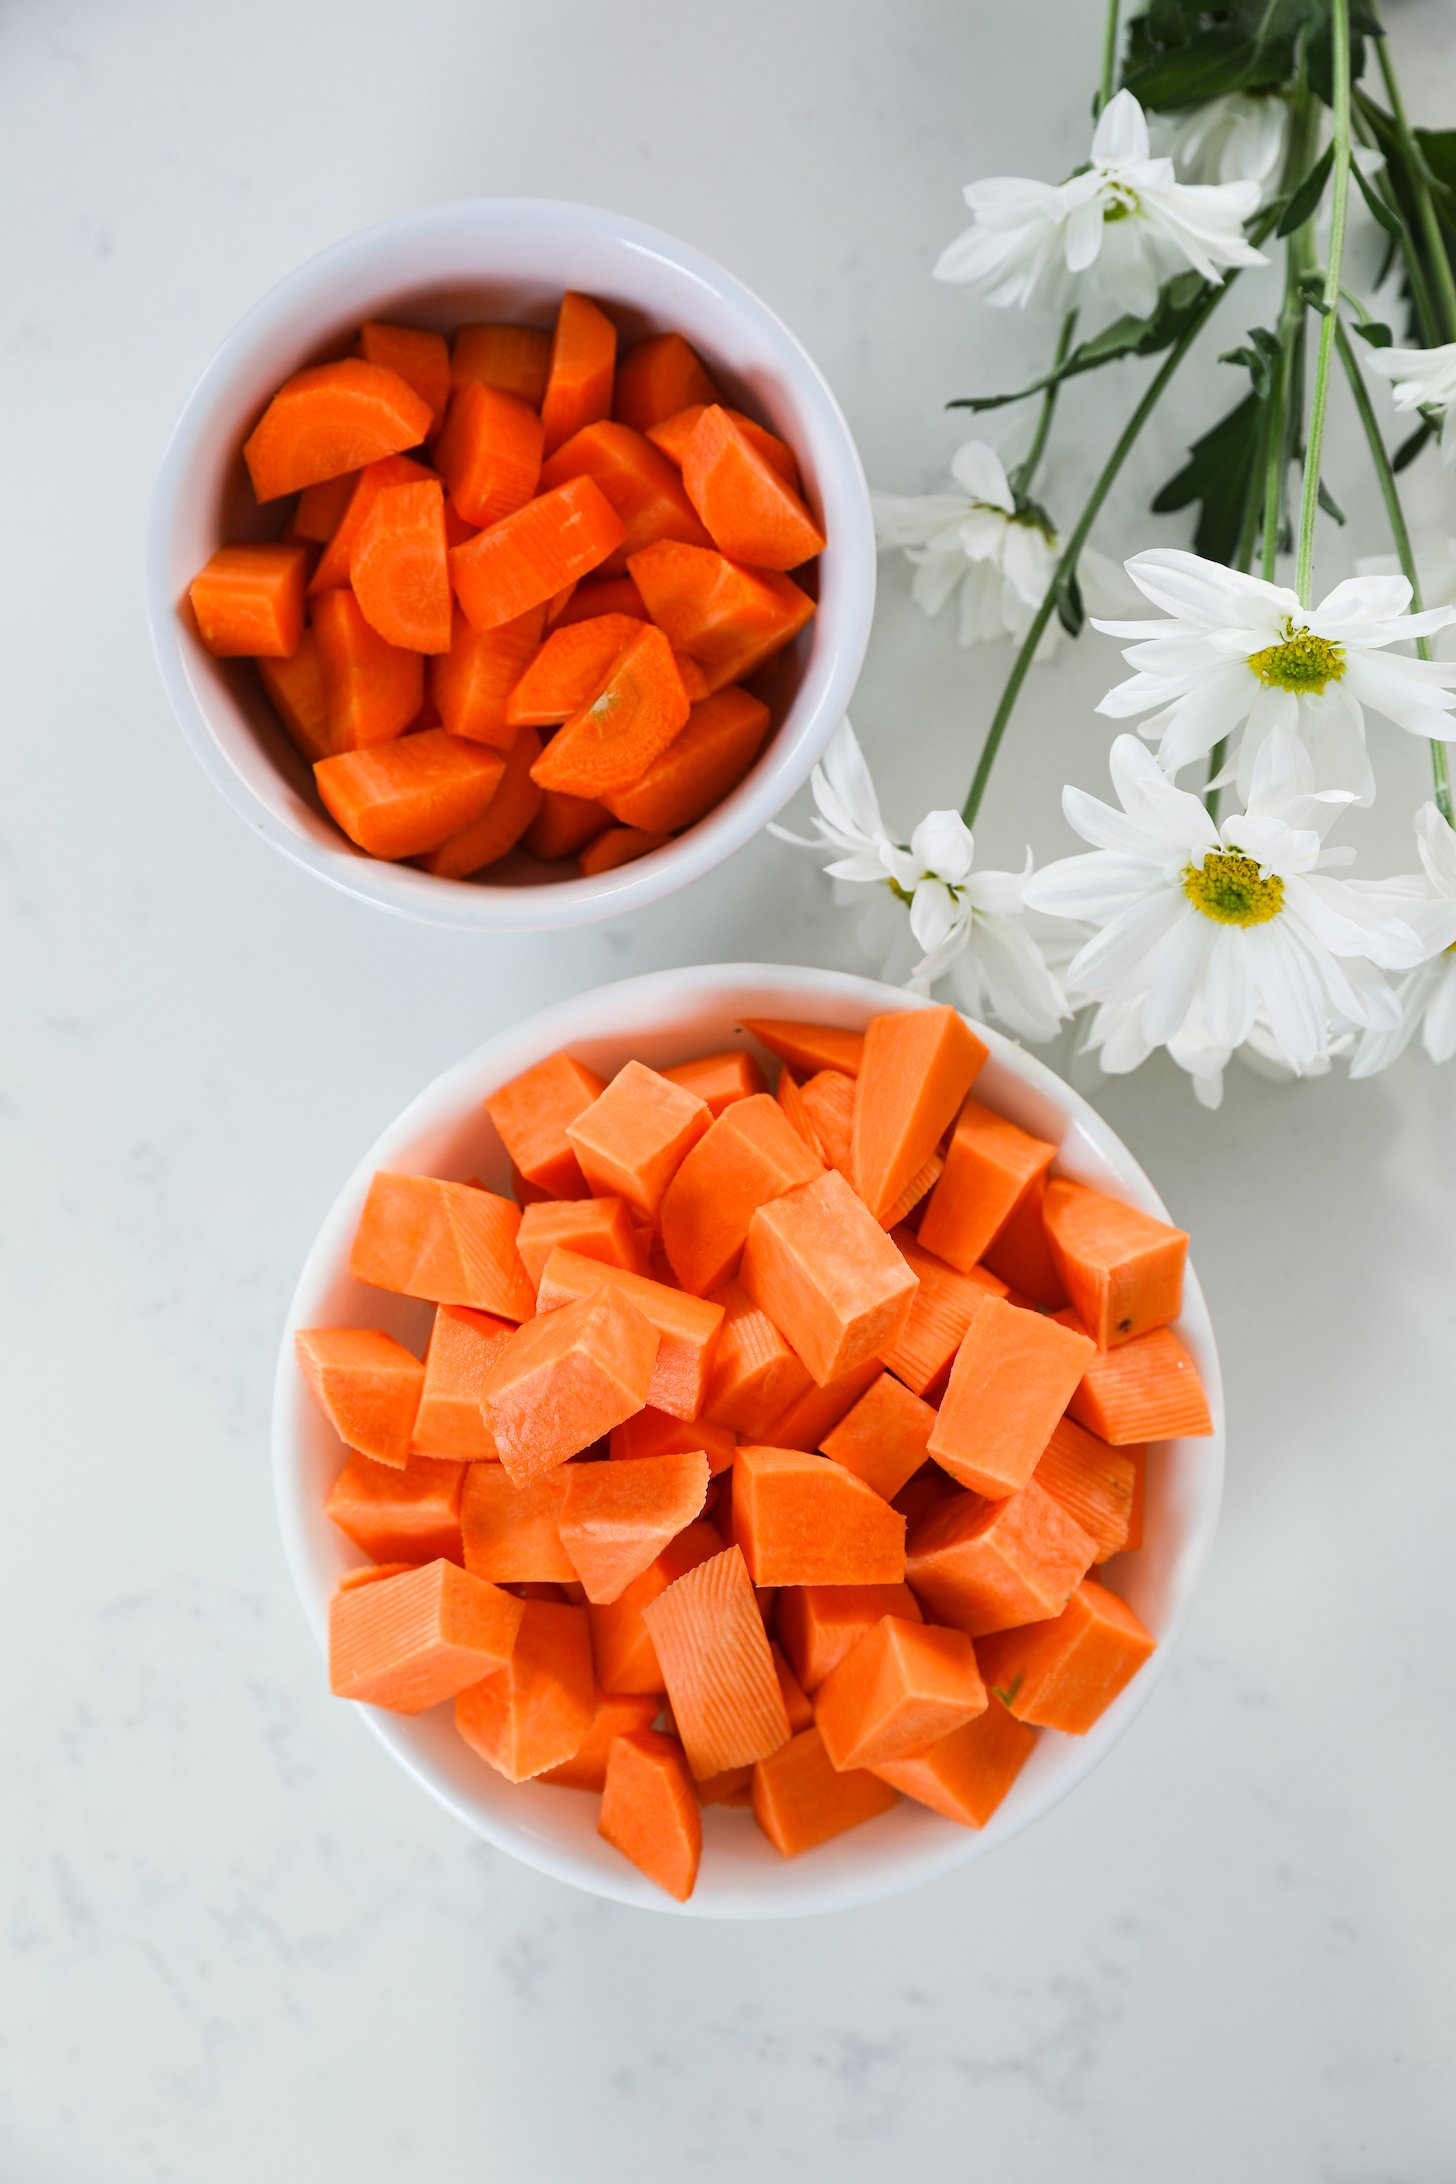 Two bowls containing chopped sweet potato and carrots, placed beside white flowers.